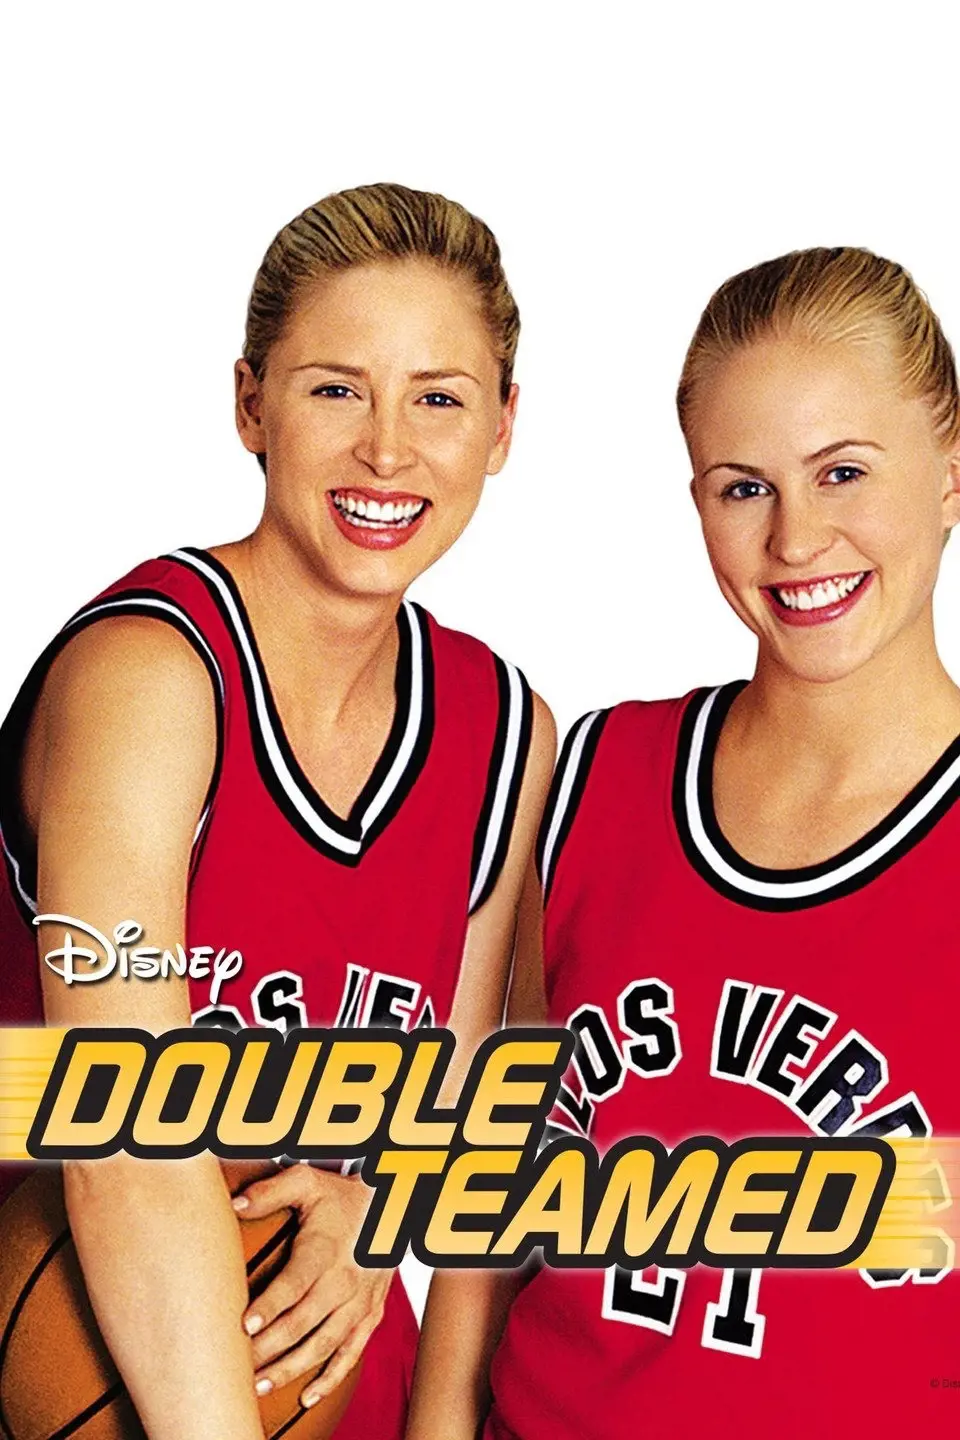 Double Teamed is inspired by story of Heather Marie and her twin sister Heidi Horton